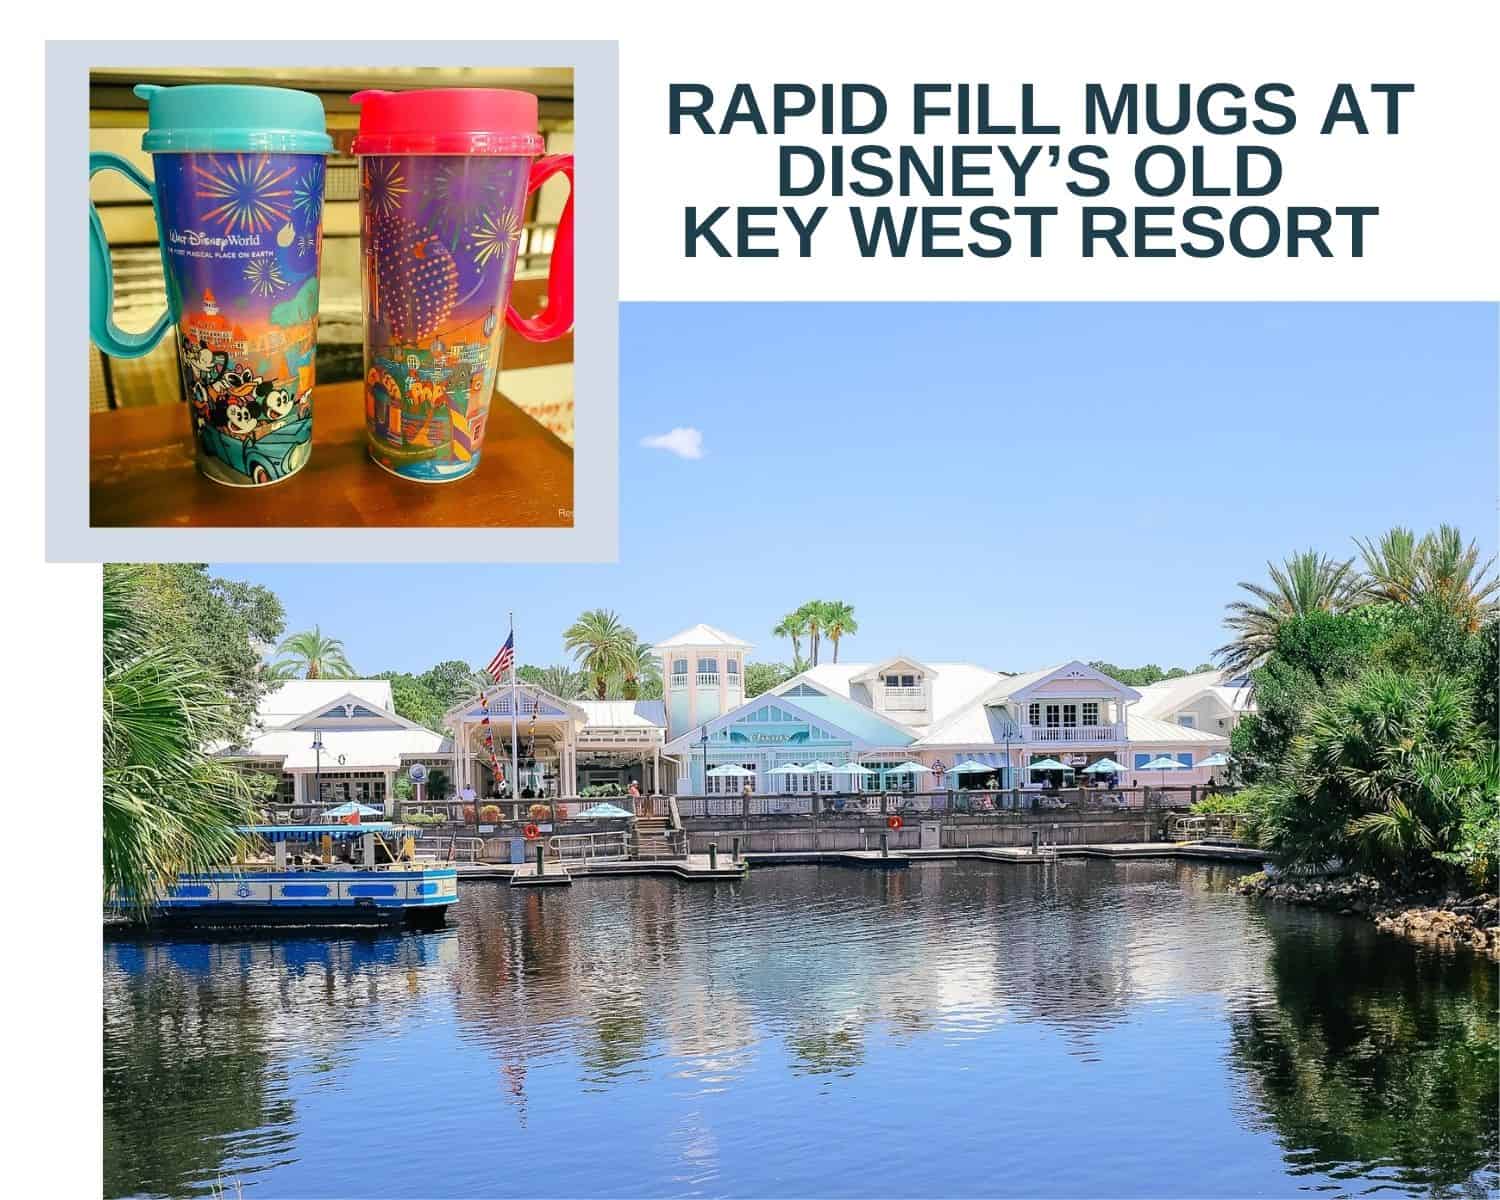 Rapid Fill Mugs, Beverages, and Drink Options for Disney’s Old Key West Resort